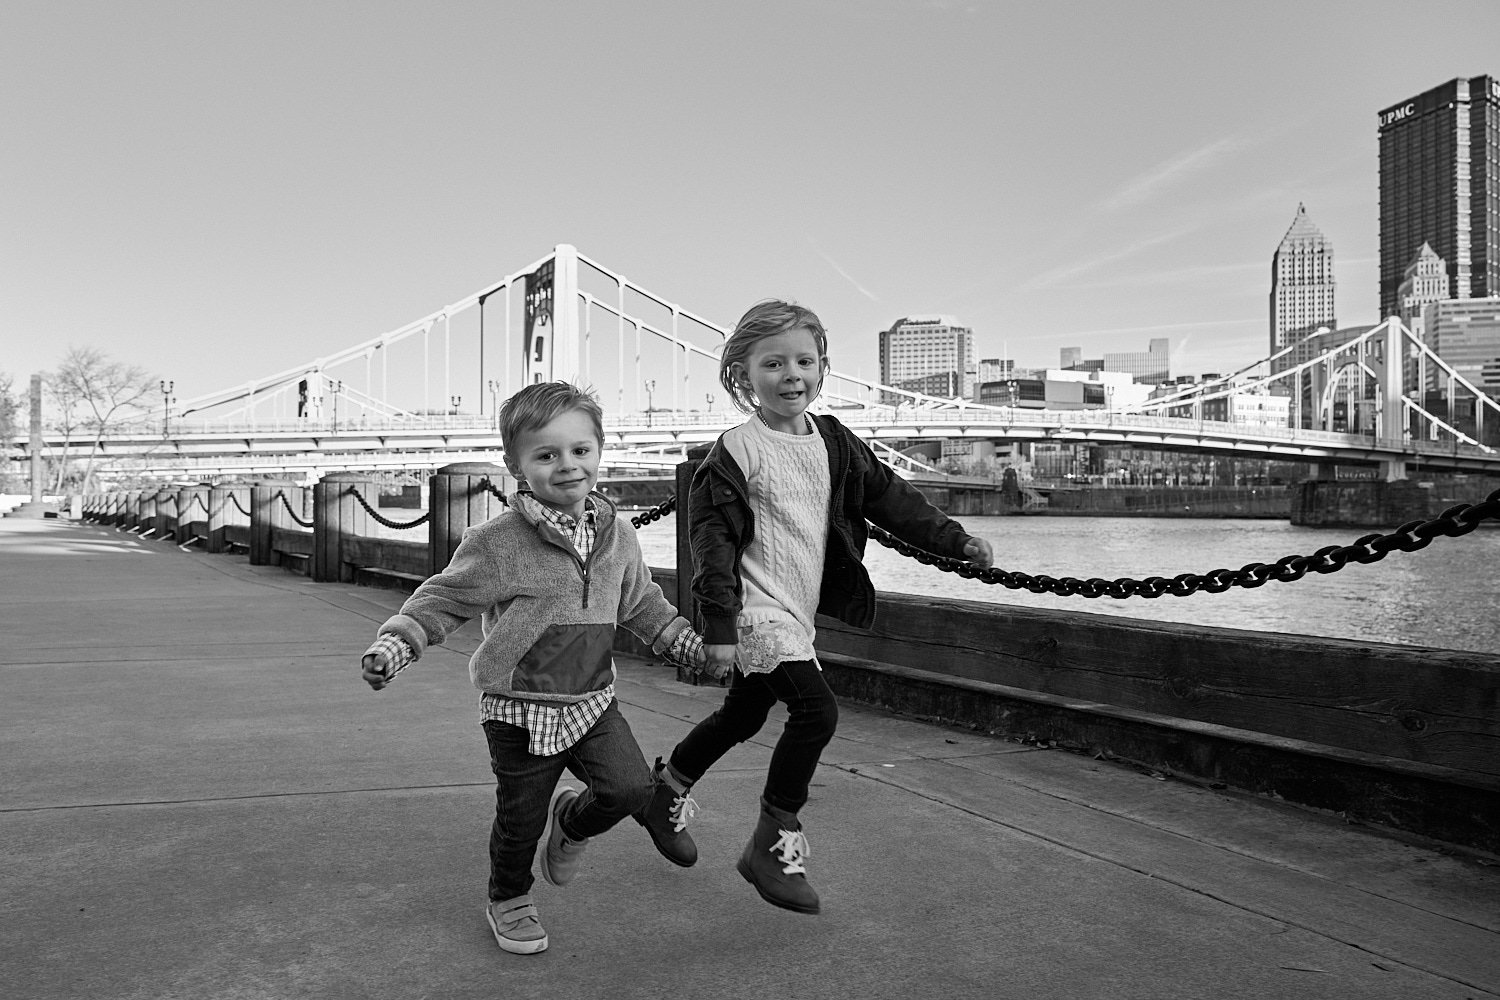  Crela Fry is posing with her husband and children by Allegheny River on the North Shore in Pittsburgh, Pennsylvania. Images are monochrome. The cityscape with yellow bridges is lit by the setting sun. 